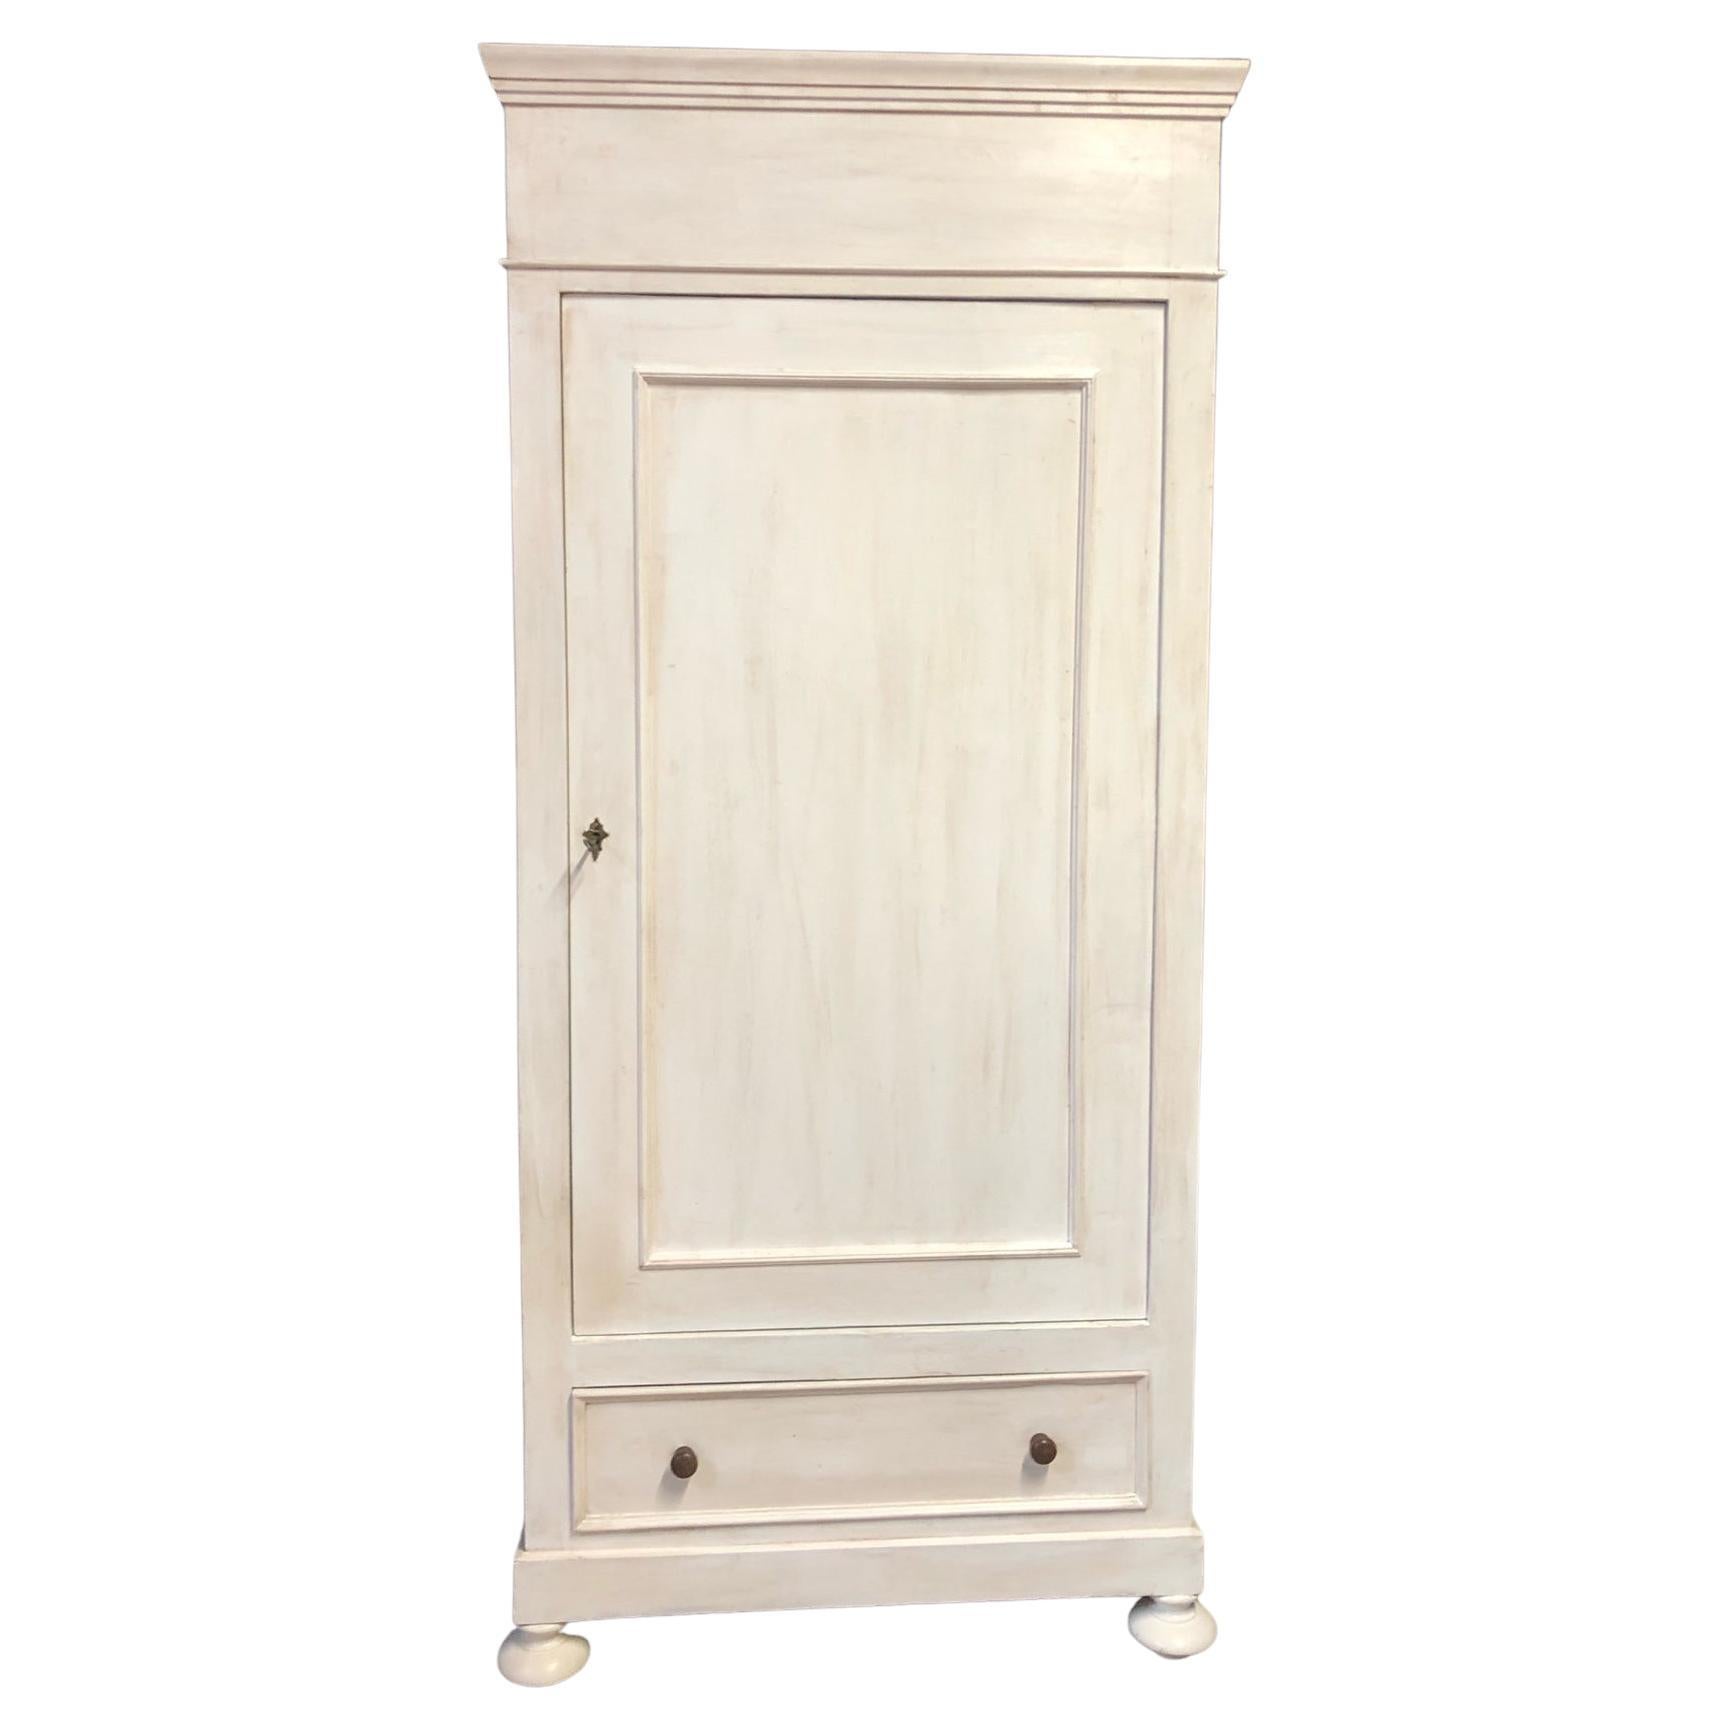 20th Century Single Door Wardrobe in Fir, Patinated White, with External Drawer